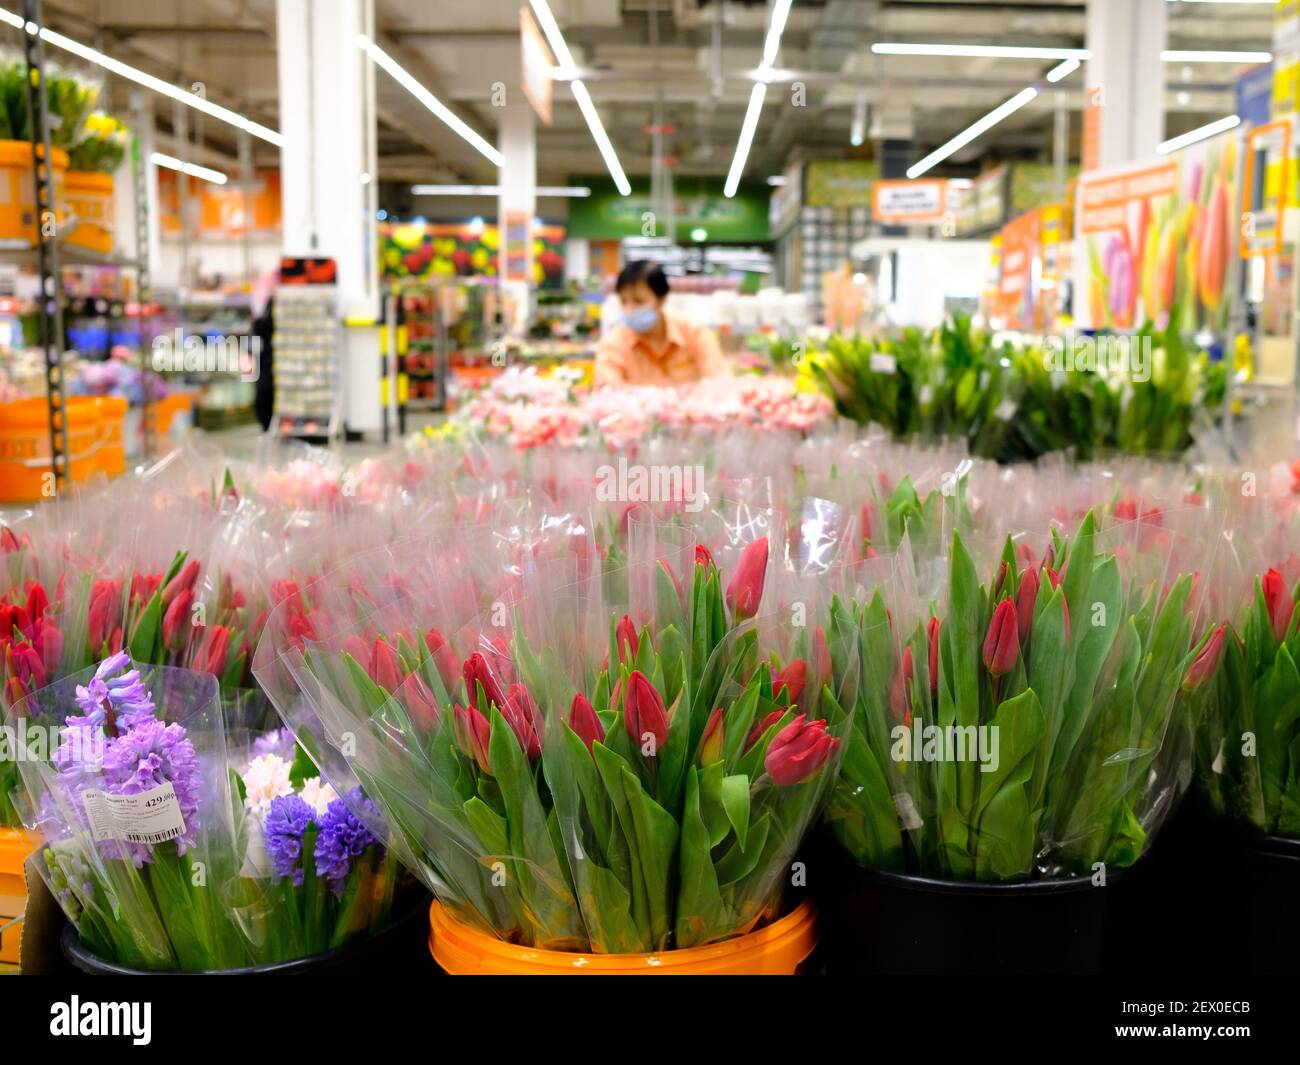 How to Expertly Wrap a Bouquet of Flowers from the Grocery Store